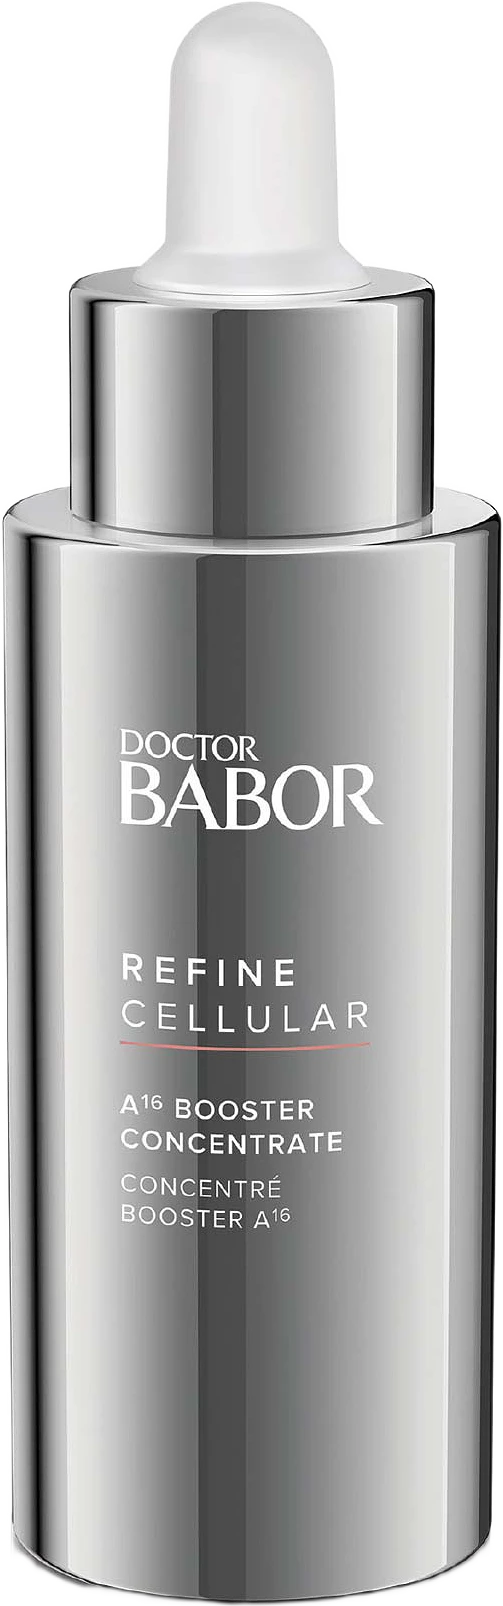 Refine Cellular A16 Booster Concentrate